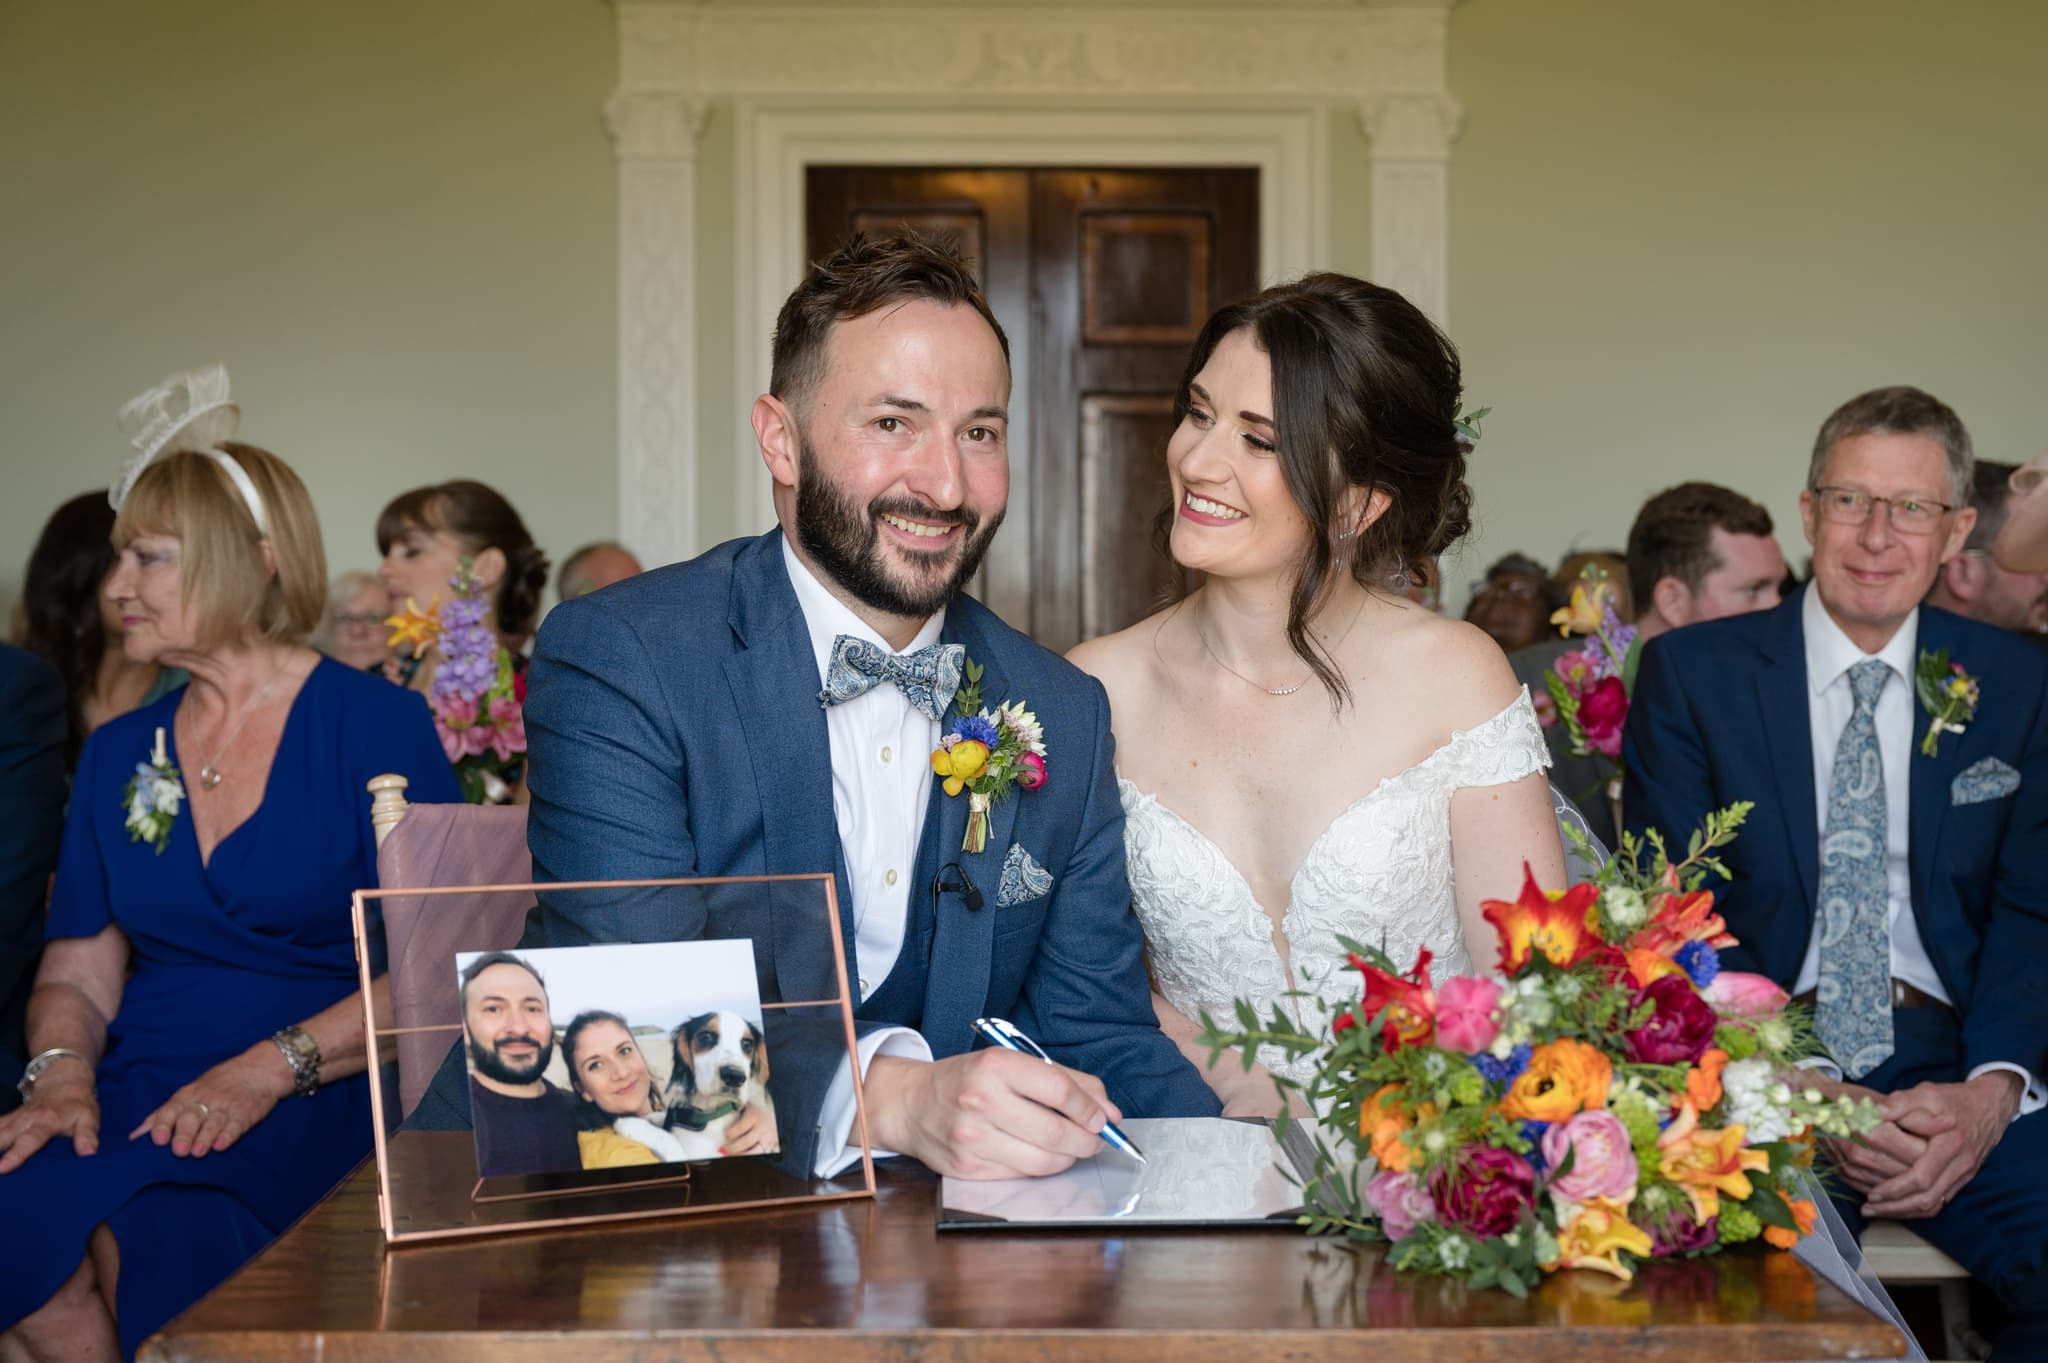 Bride and groom signing the register - with a photo of the couple and their dog on the table alongside the bride's bouquet